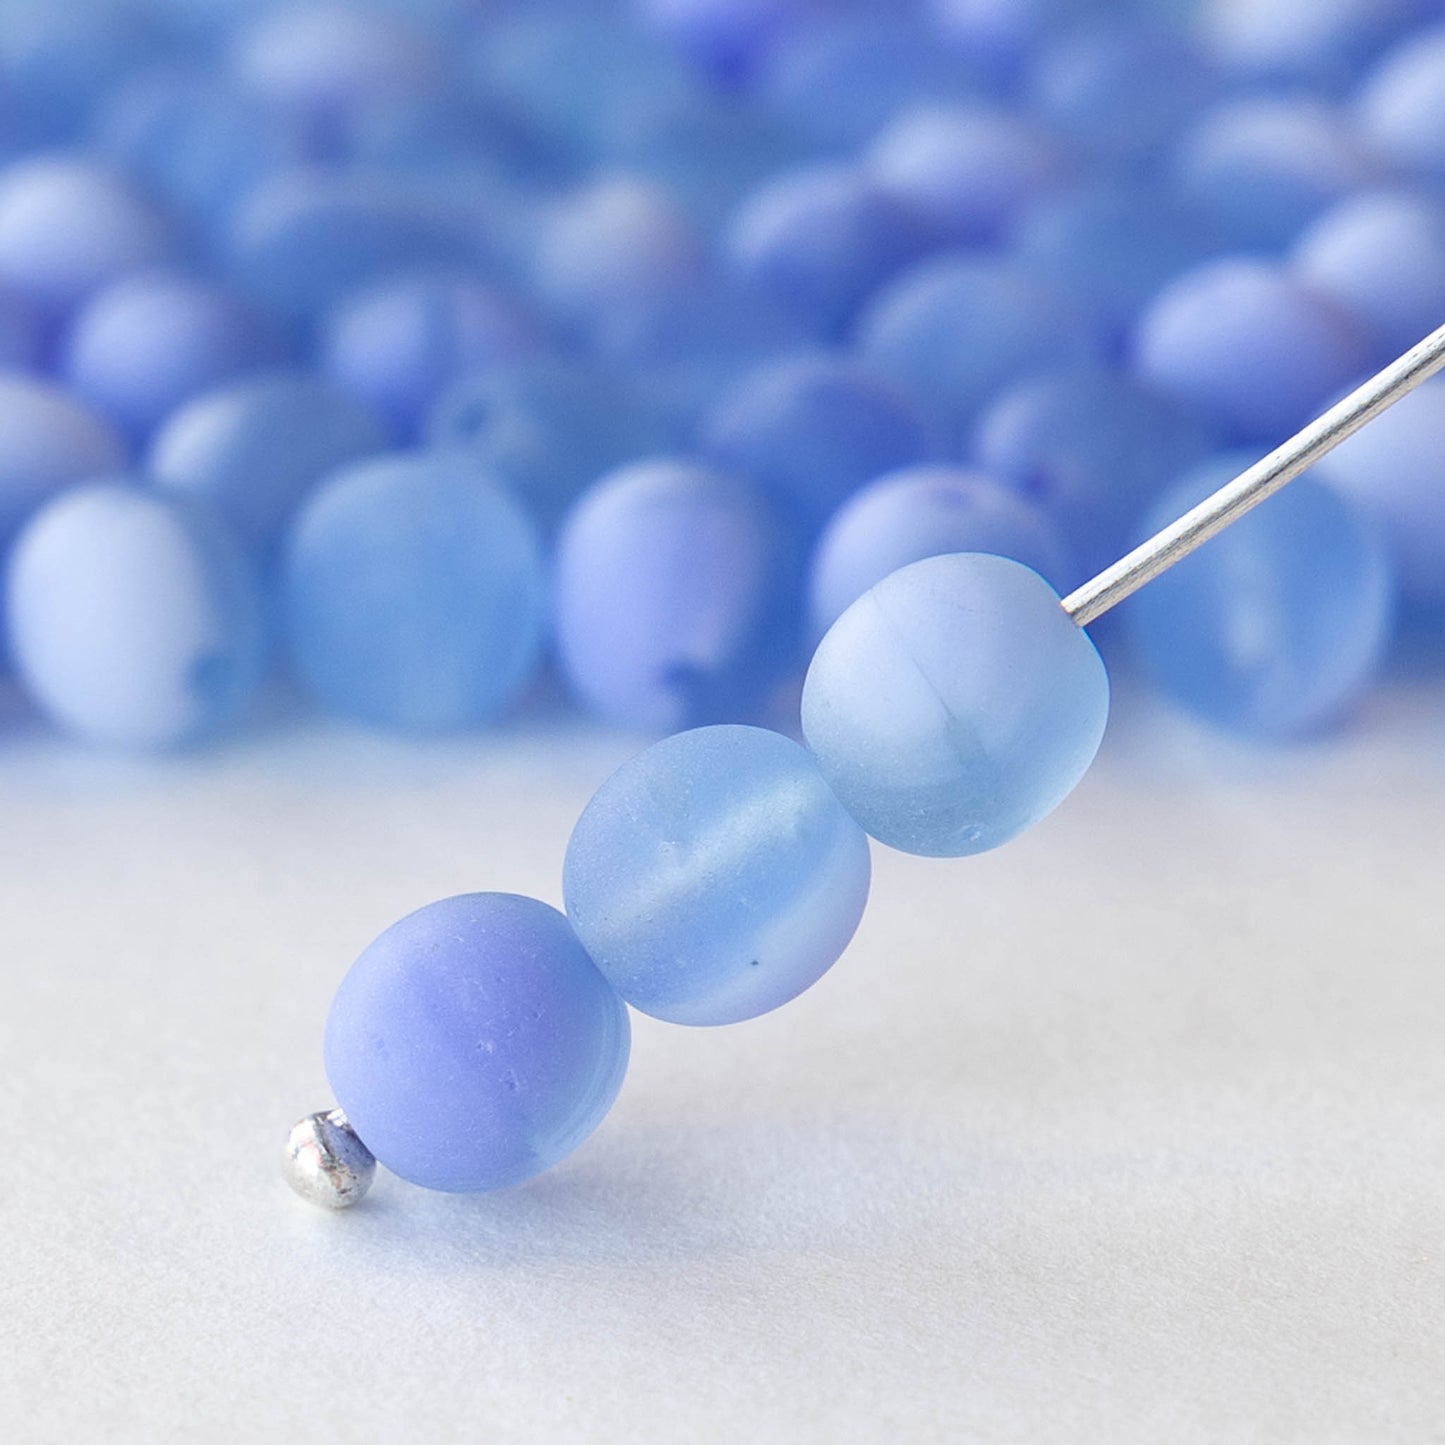 6mm Round Glass Beads - Matte Blue Marble - 60 Beads